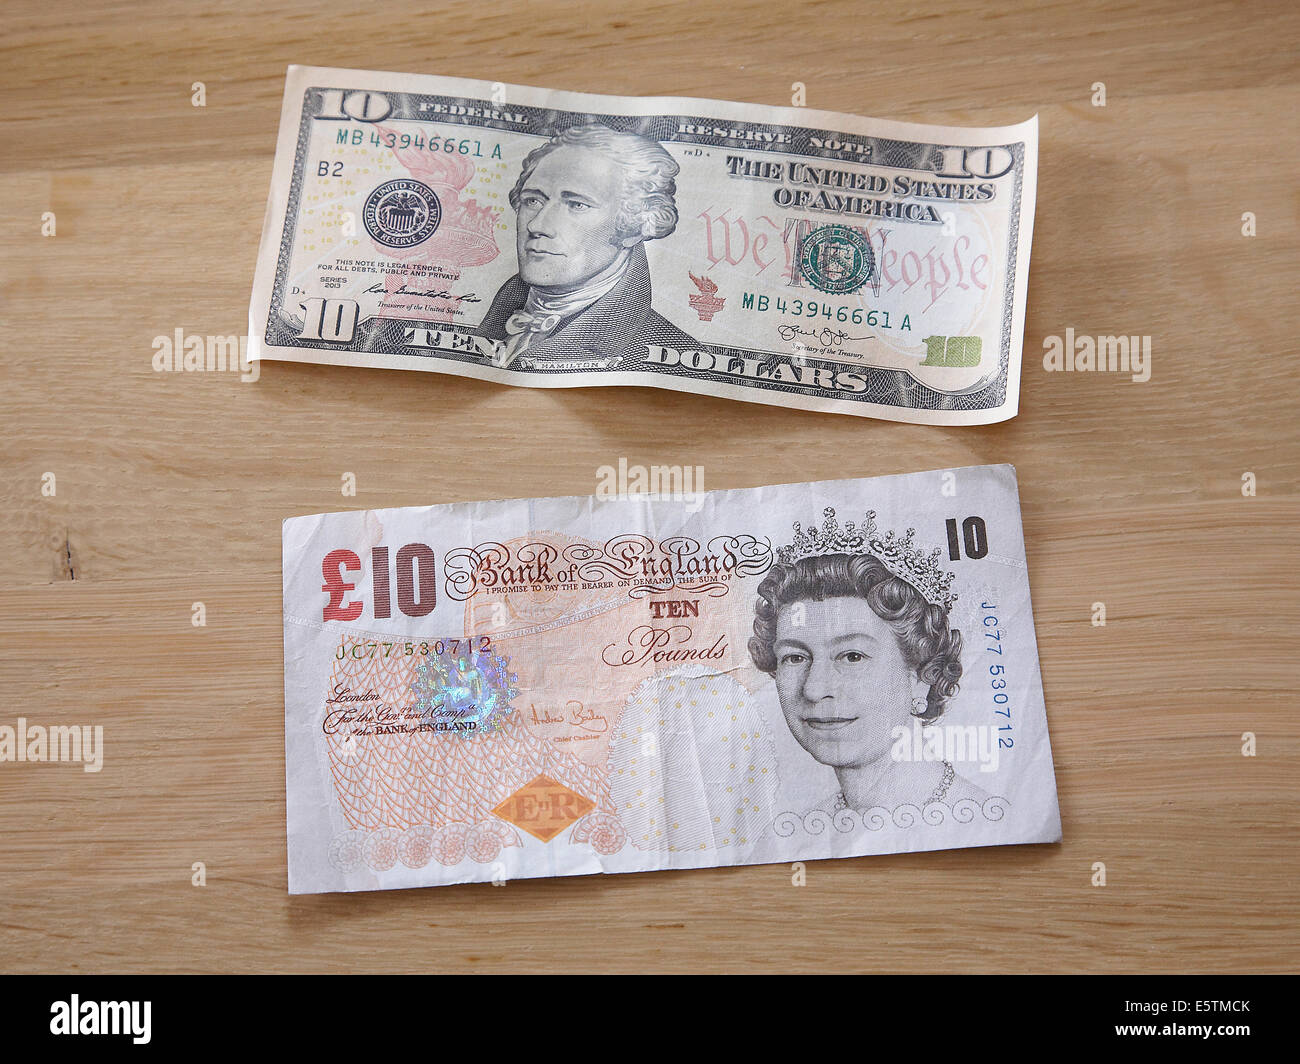 A British ten pound note and an American ten dollar note. Stock Photo